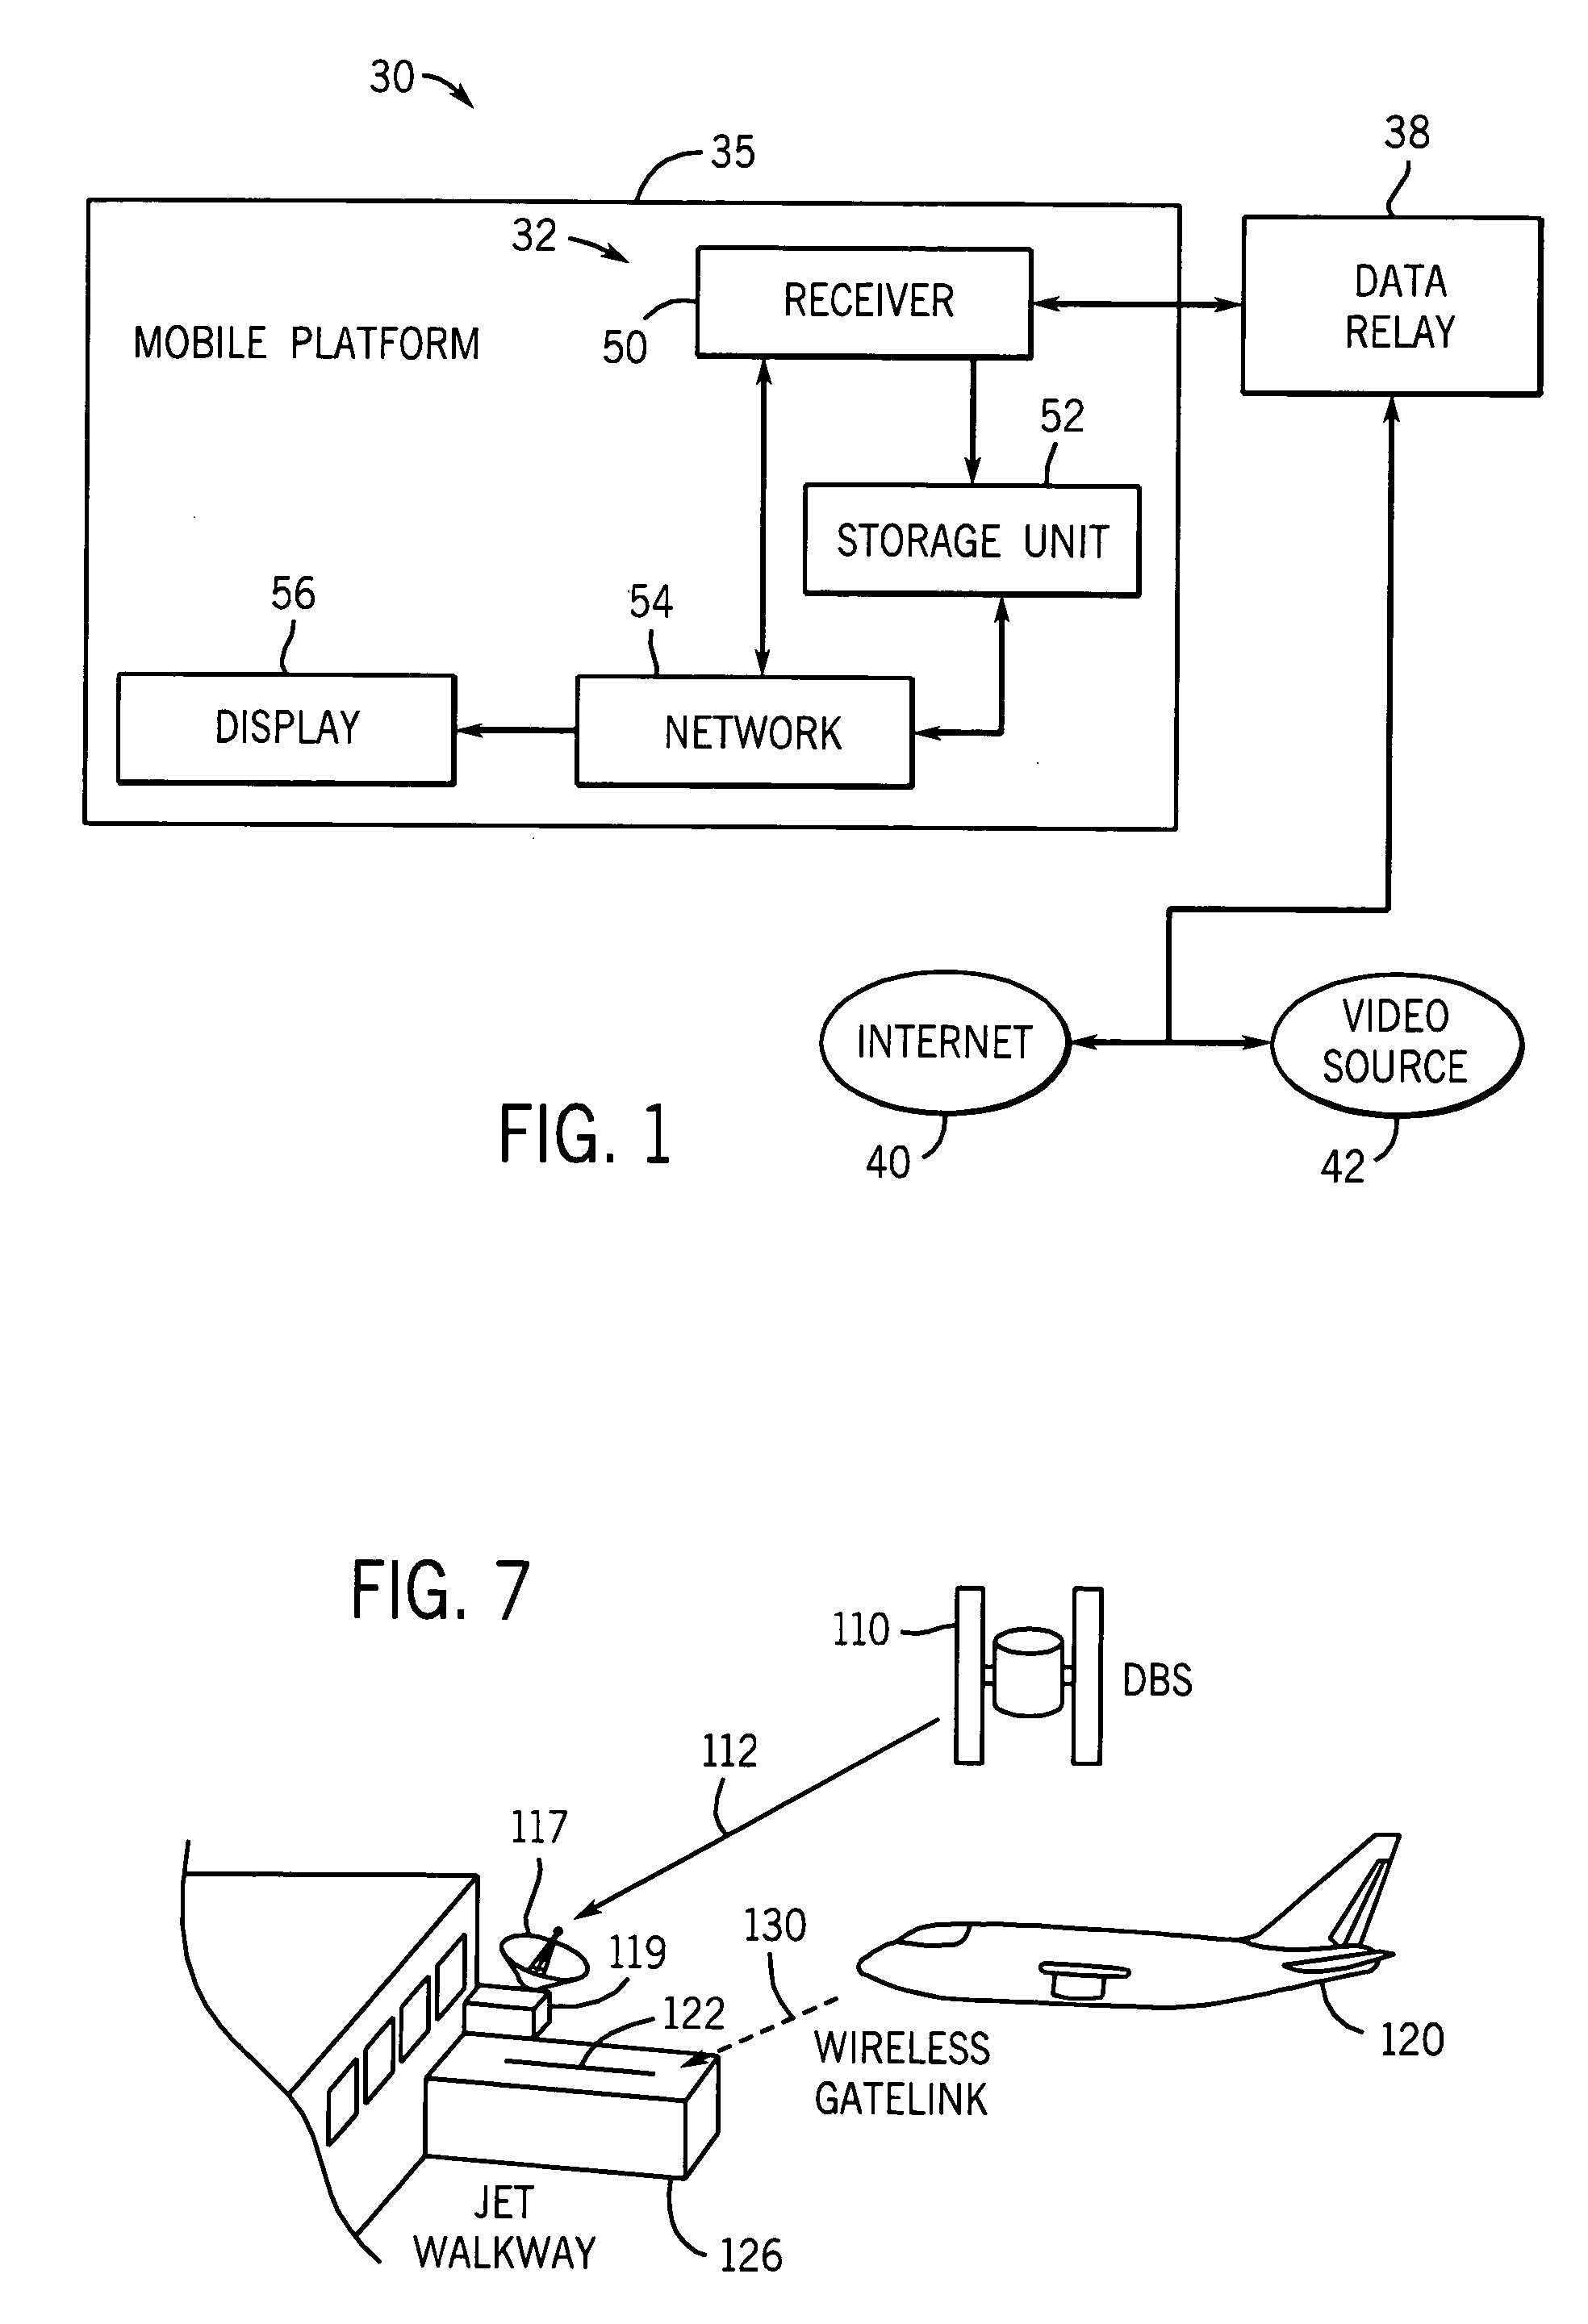 System and method for internet access on a mobile platform